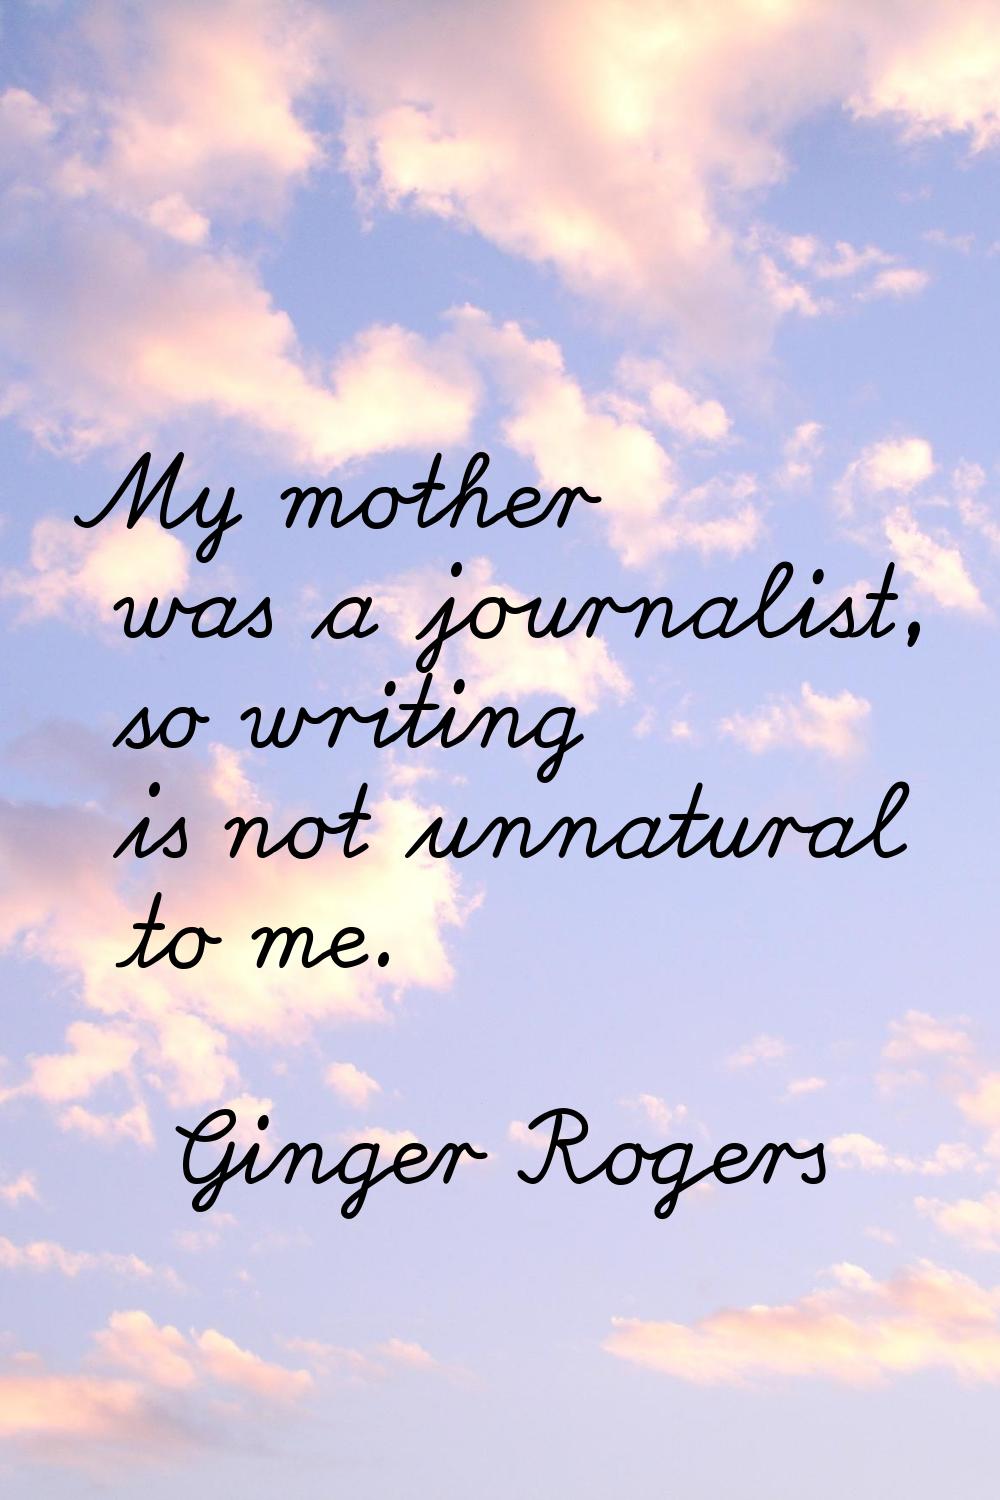 My mother was a journalist, so writing is not unnatural to me.